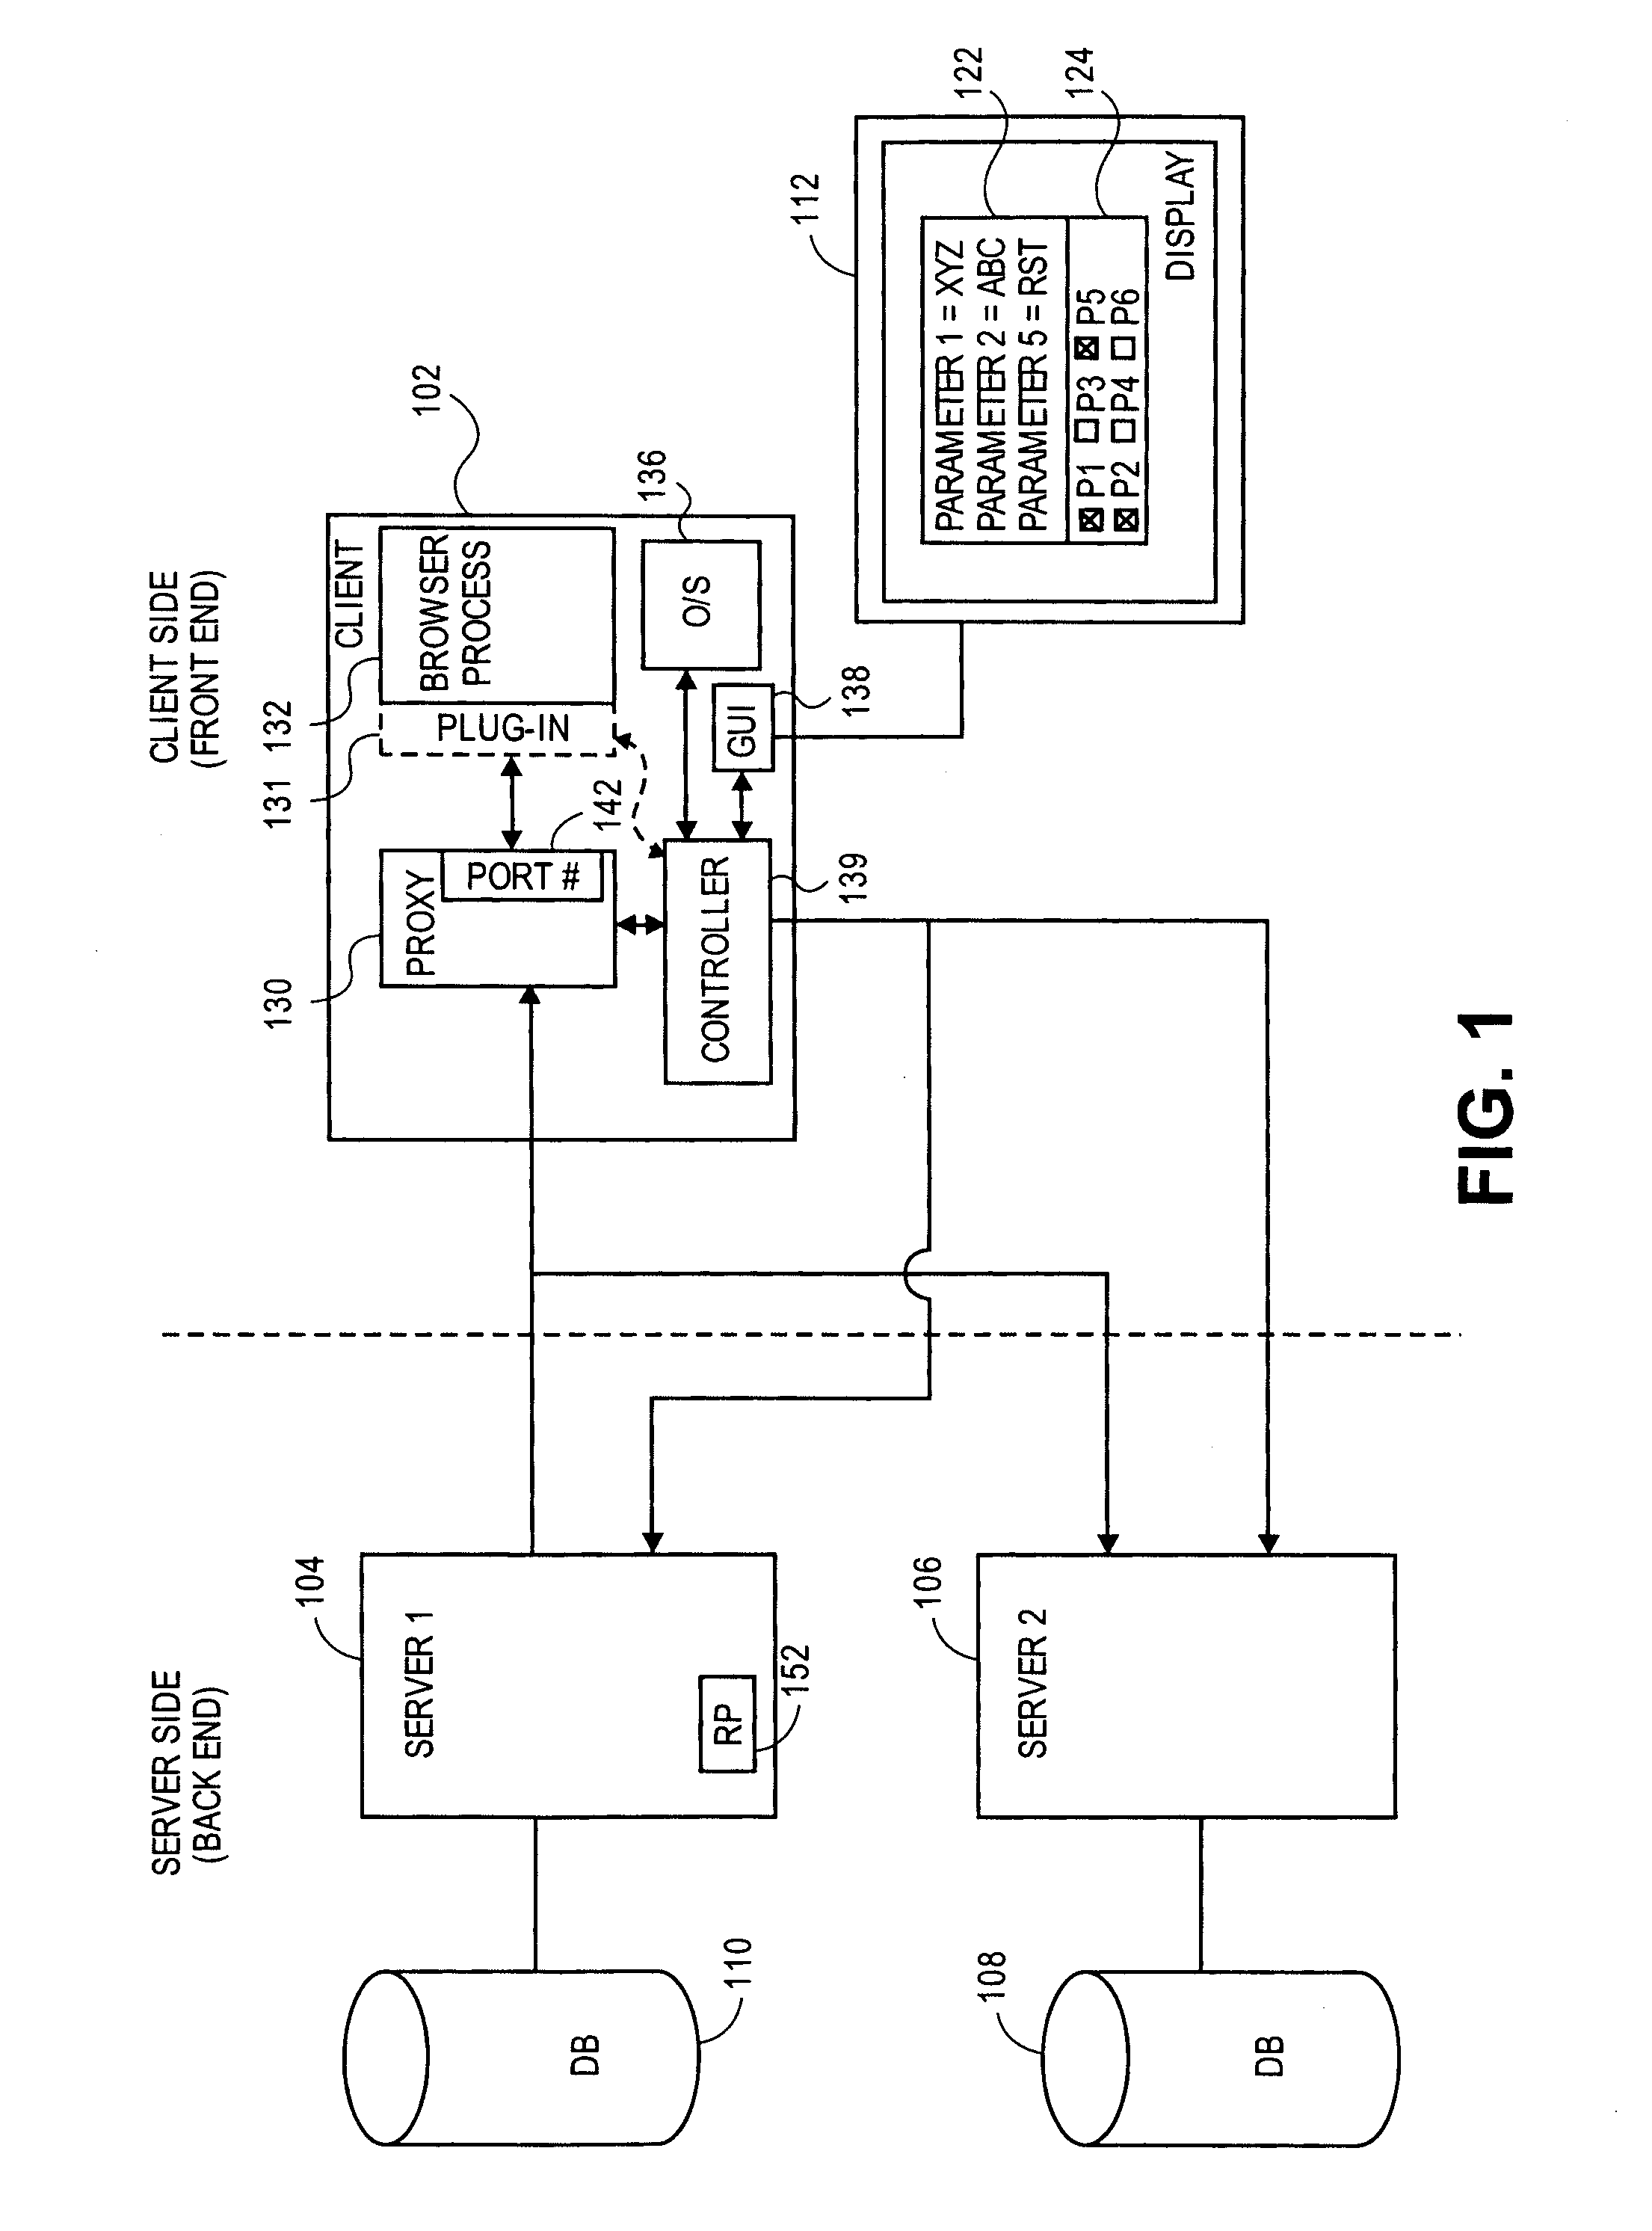 Method and system to monitor parameters of a data flow path in a communication system